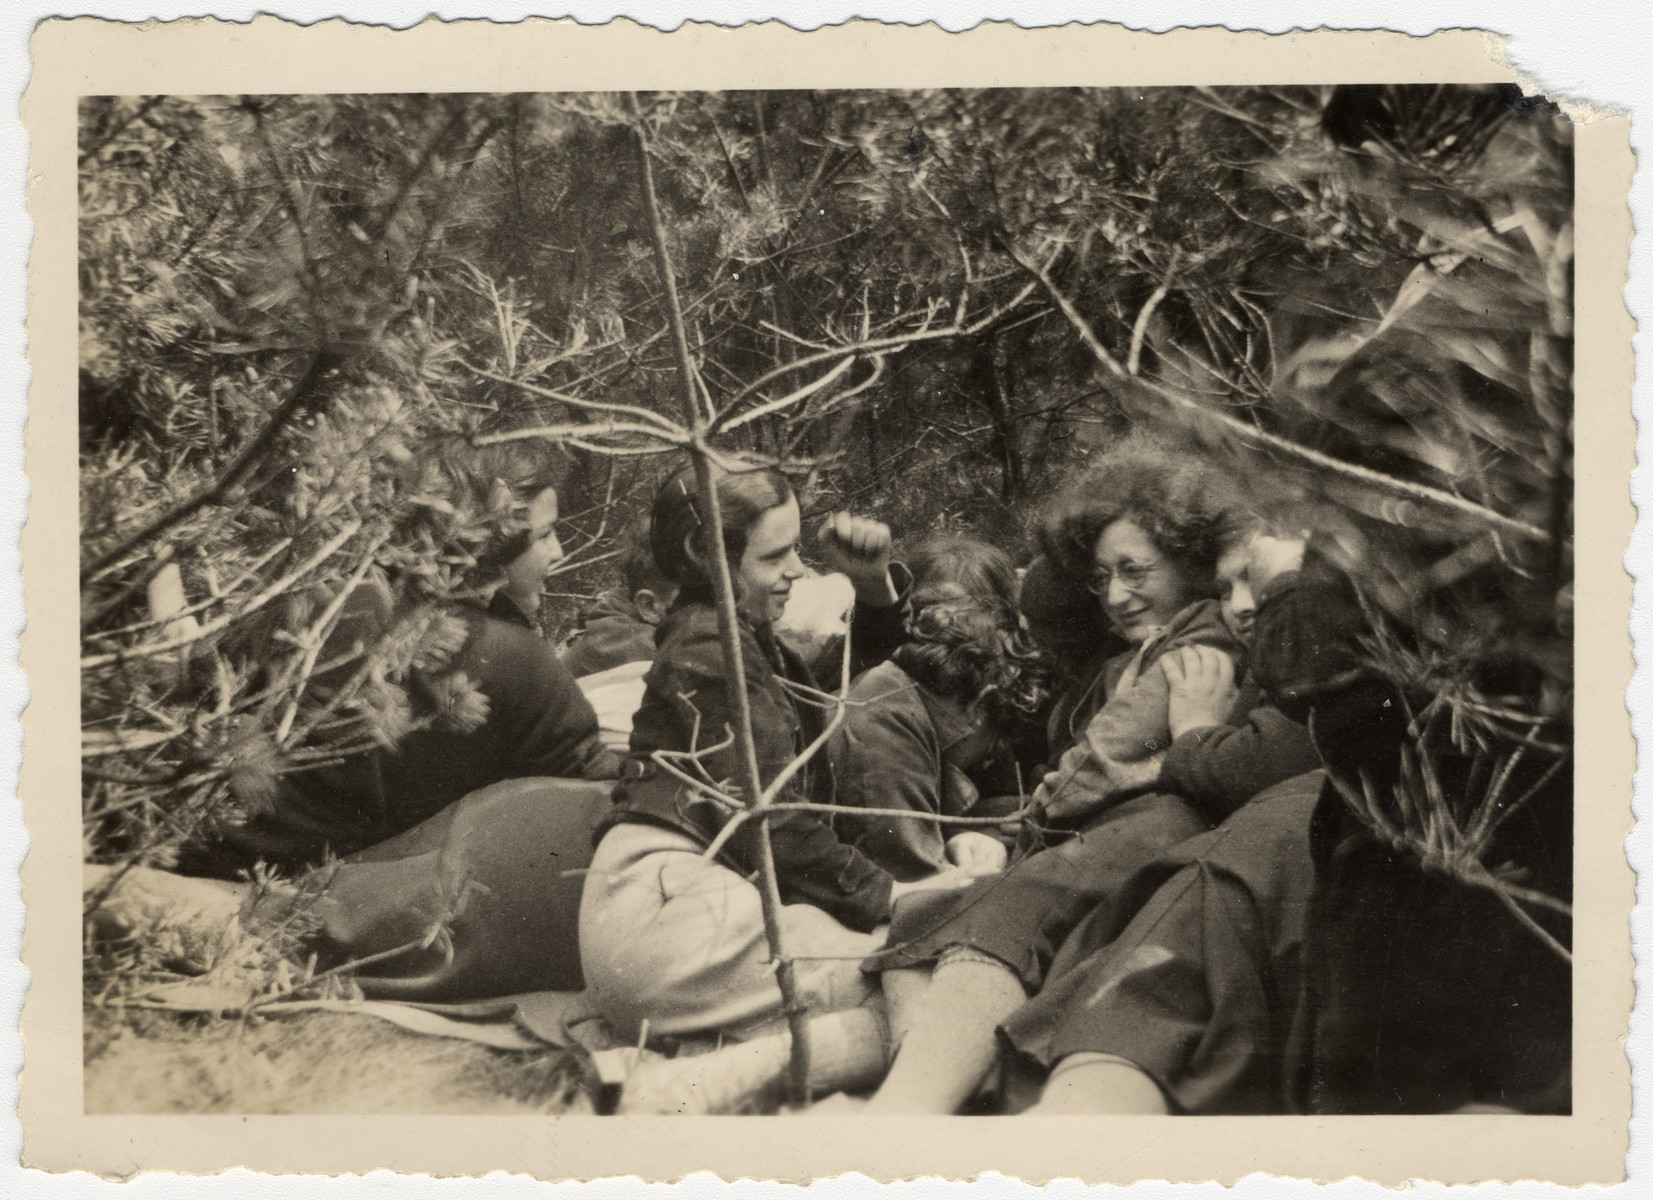 A group of Zionist teeange girls rest during an excursion in the woods.

The orignal caption reads "en route to freedom."